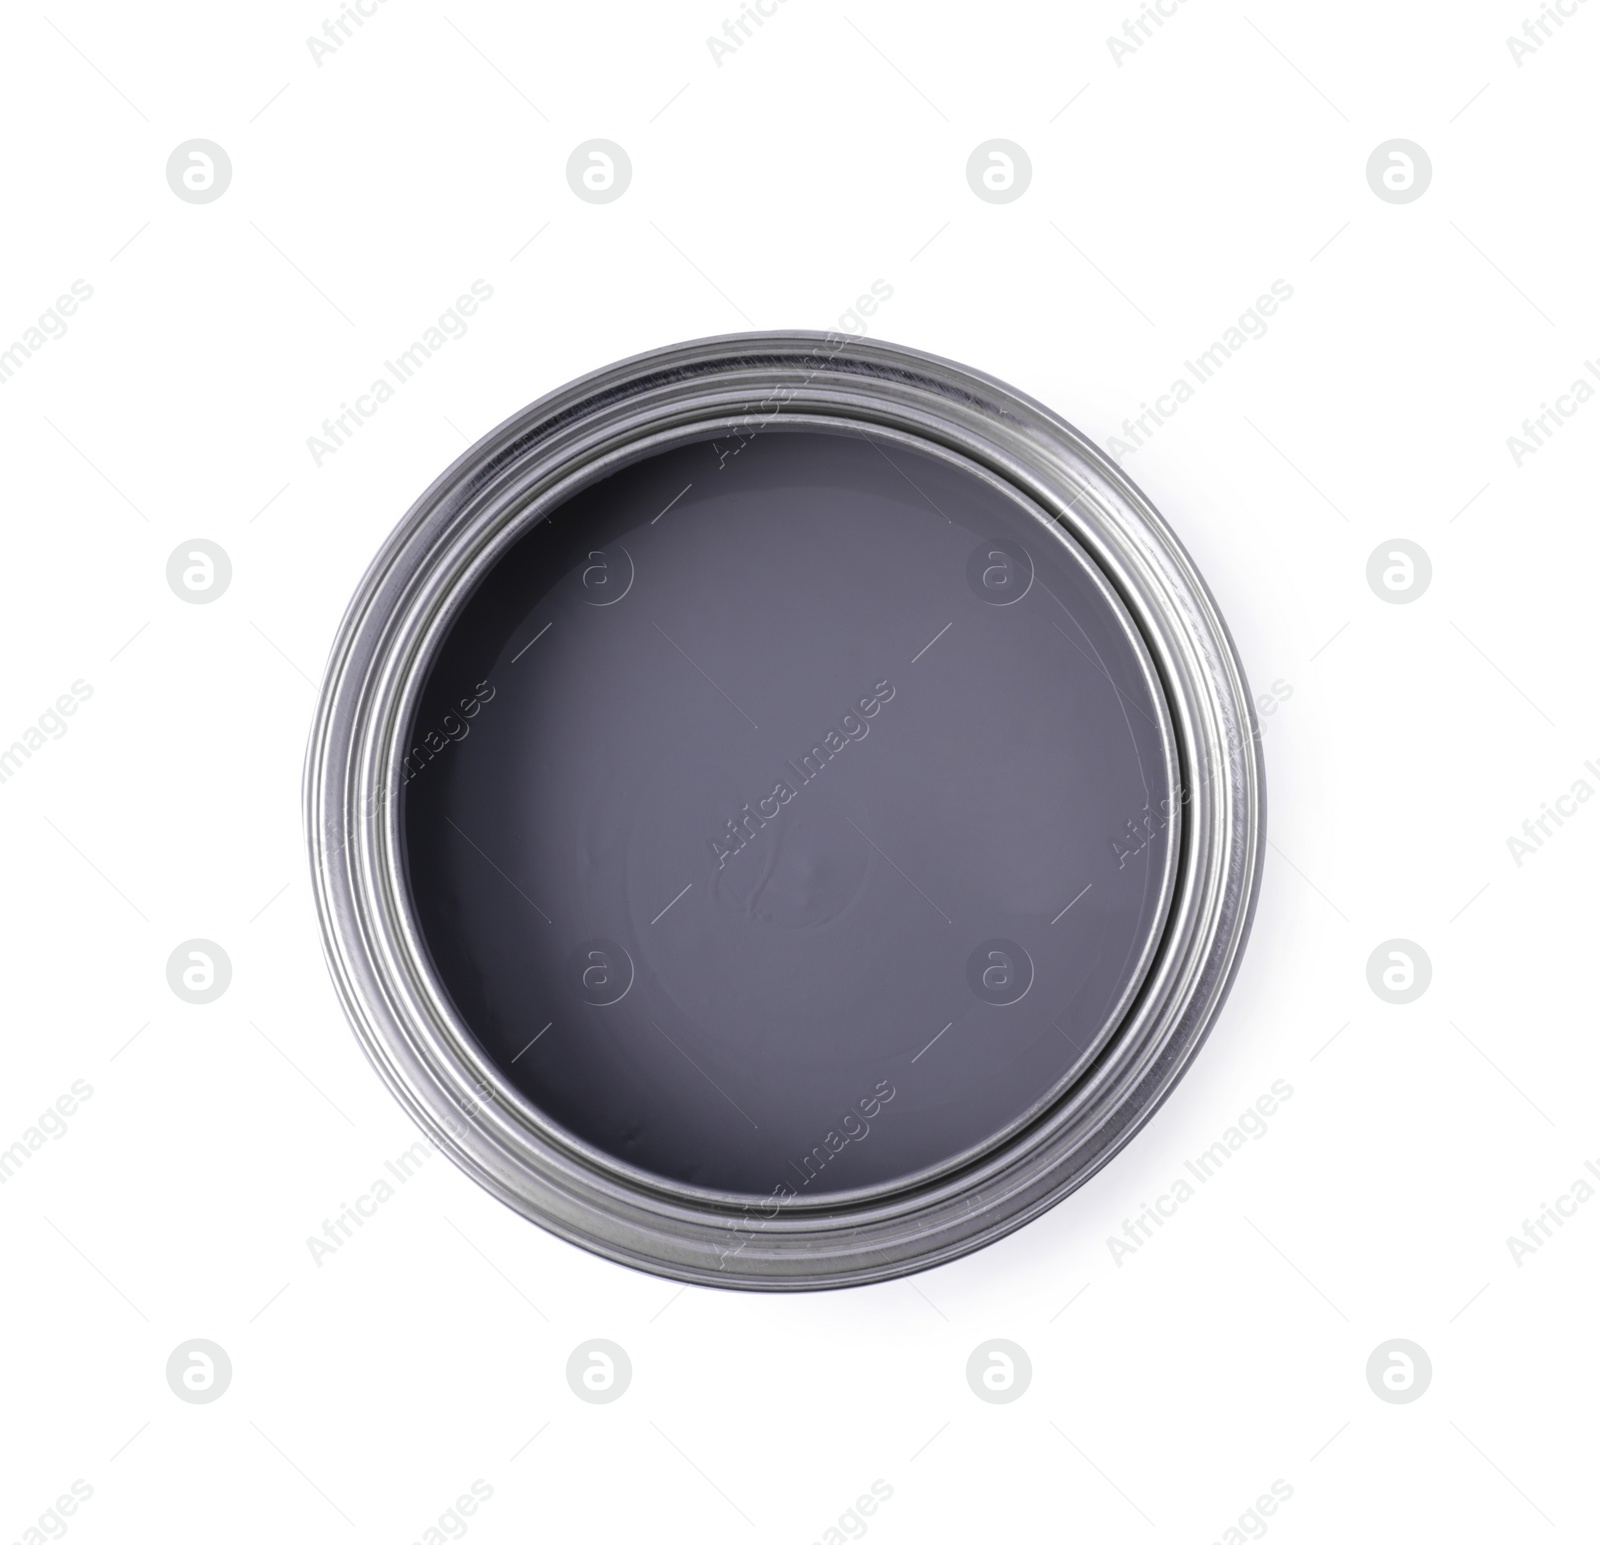 Photo of Can with gray paint on white background, top view